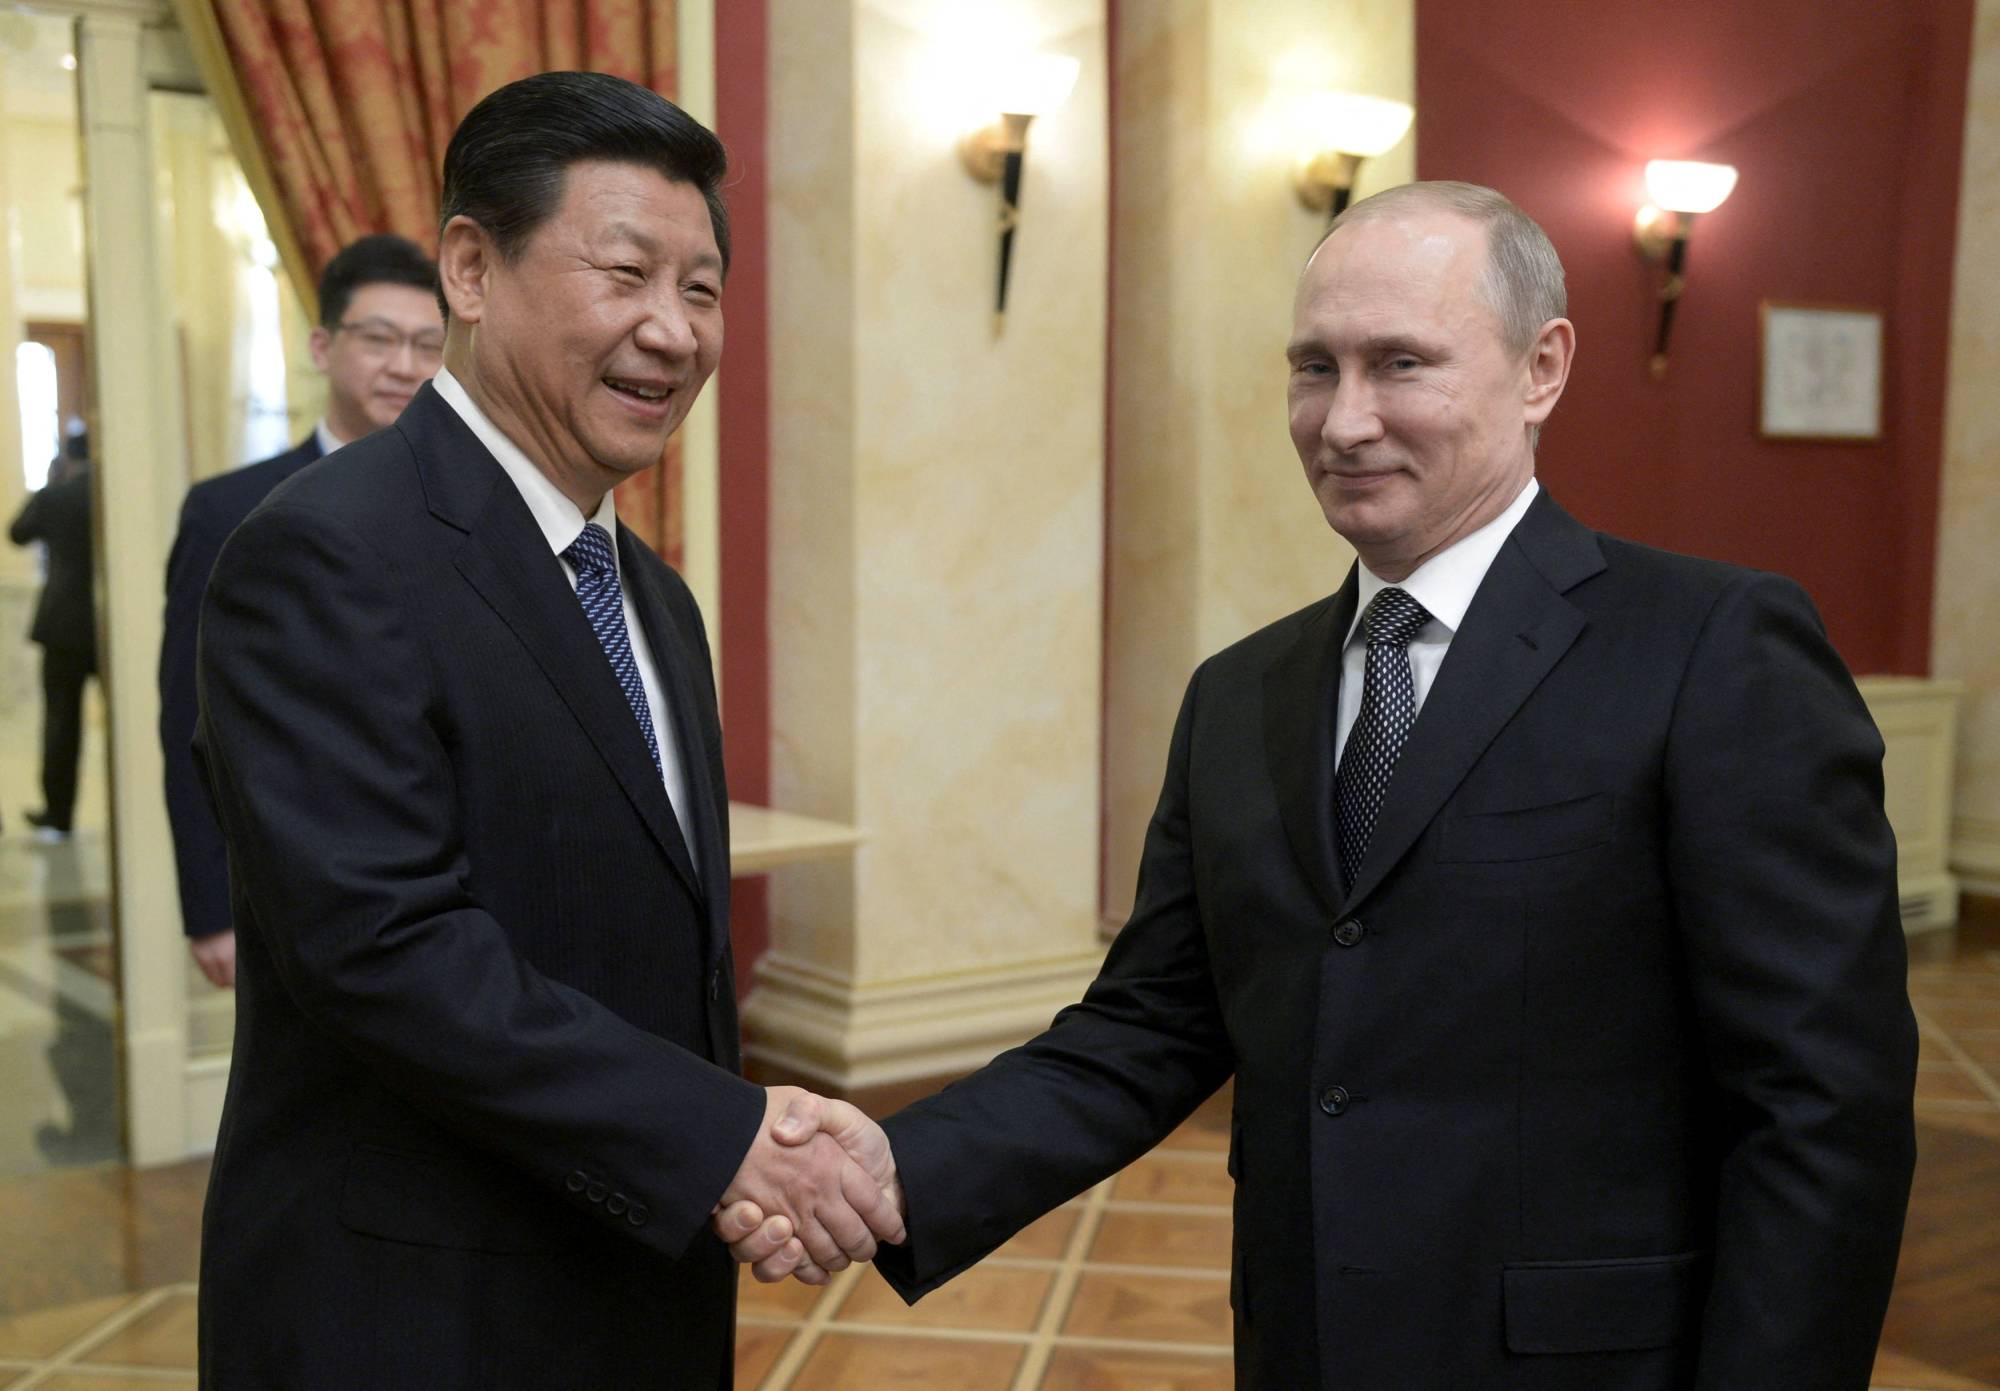 Chinese and Russian ties are a friendship of convenience, and the two nations can only really come together when facing a common enemy such as the West. |  RIA NOVOSTI / KREMLIN / VIA REUTERS